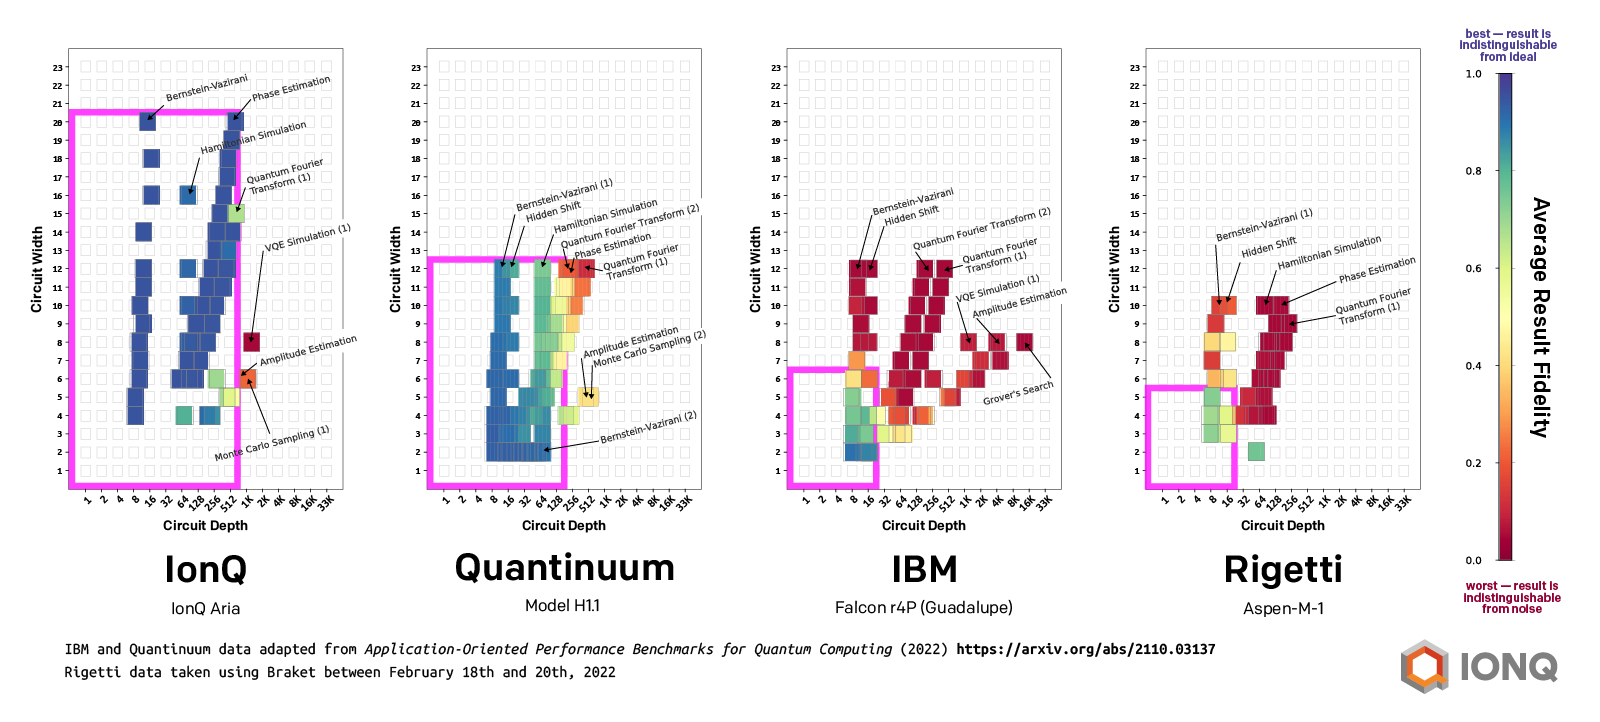 Side-by-side comparison of quantum computers using QED-C application-oriented benchmarks. Pink rectangles indicate the range in which applications are likely to succeed. IonQ results demonstrate capability of more than 550 gates vs. only dozens for superconducting systems. Each increment in the size of the pink box along the X axis (Circuit Depth) represents doubling of the area. Each increment in the size of the pink box along the Y axis (Circuit Width) represents roughly doubling in computational space.